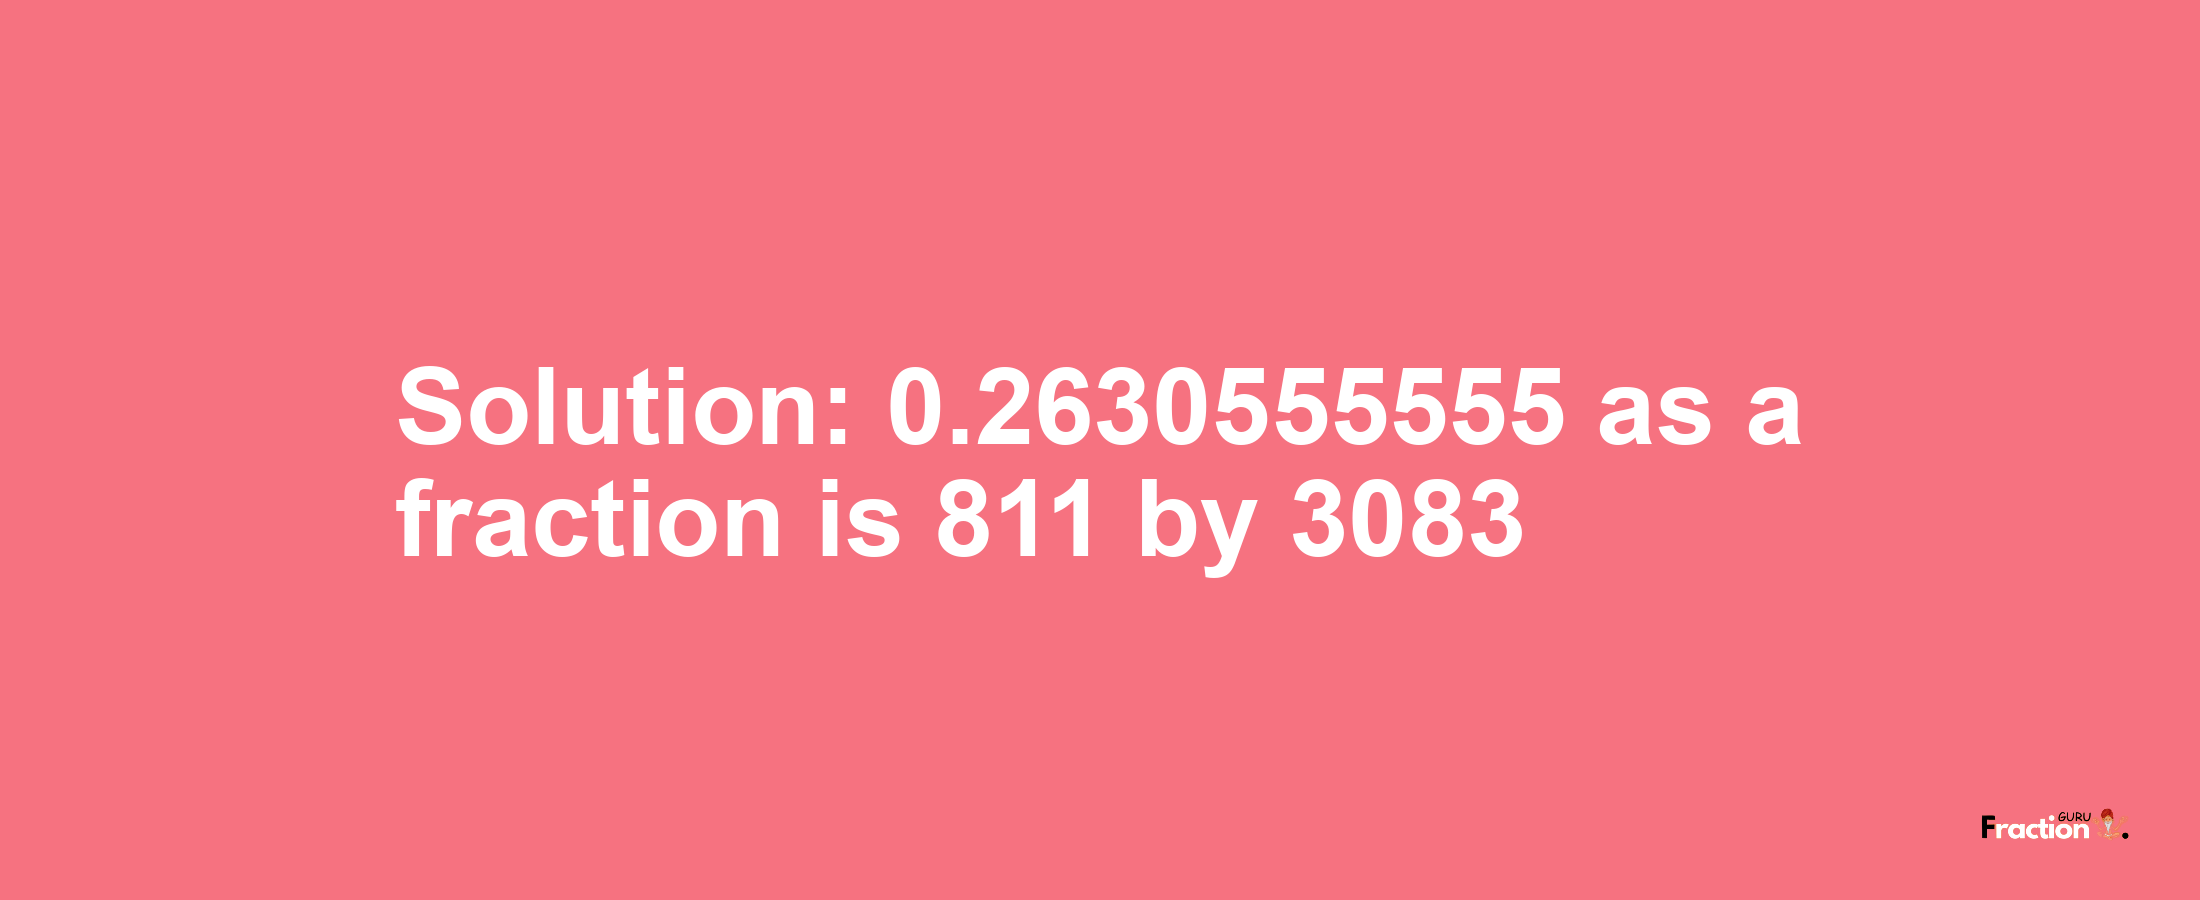 Solution:0.2630555555 as a fraction is 811/3083